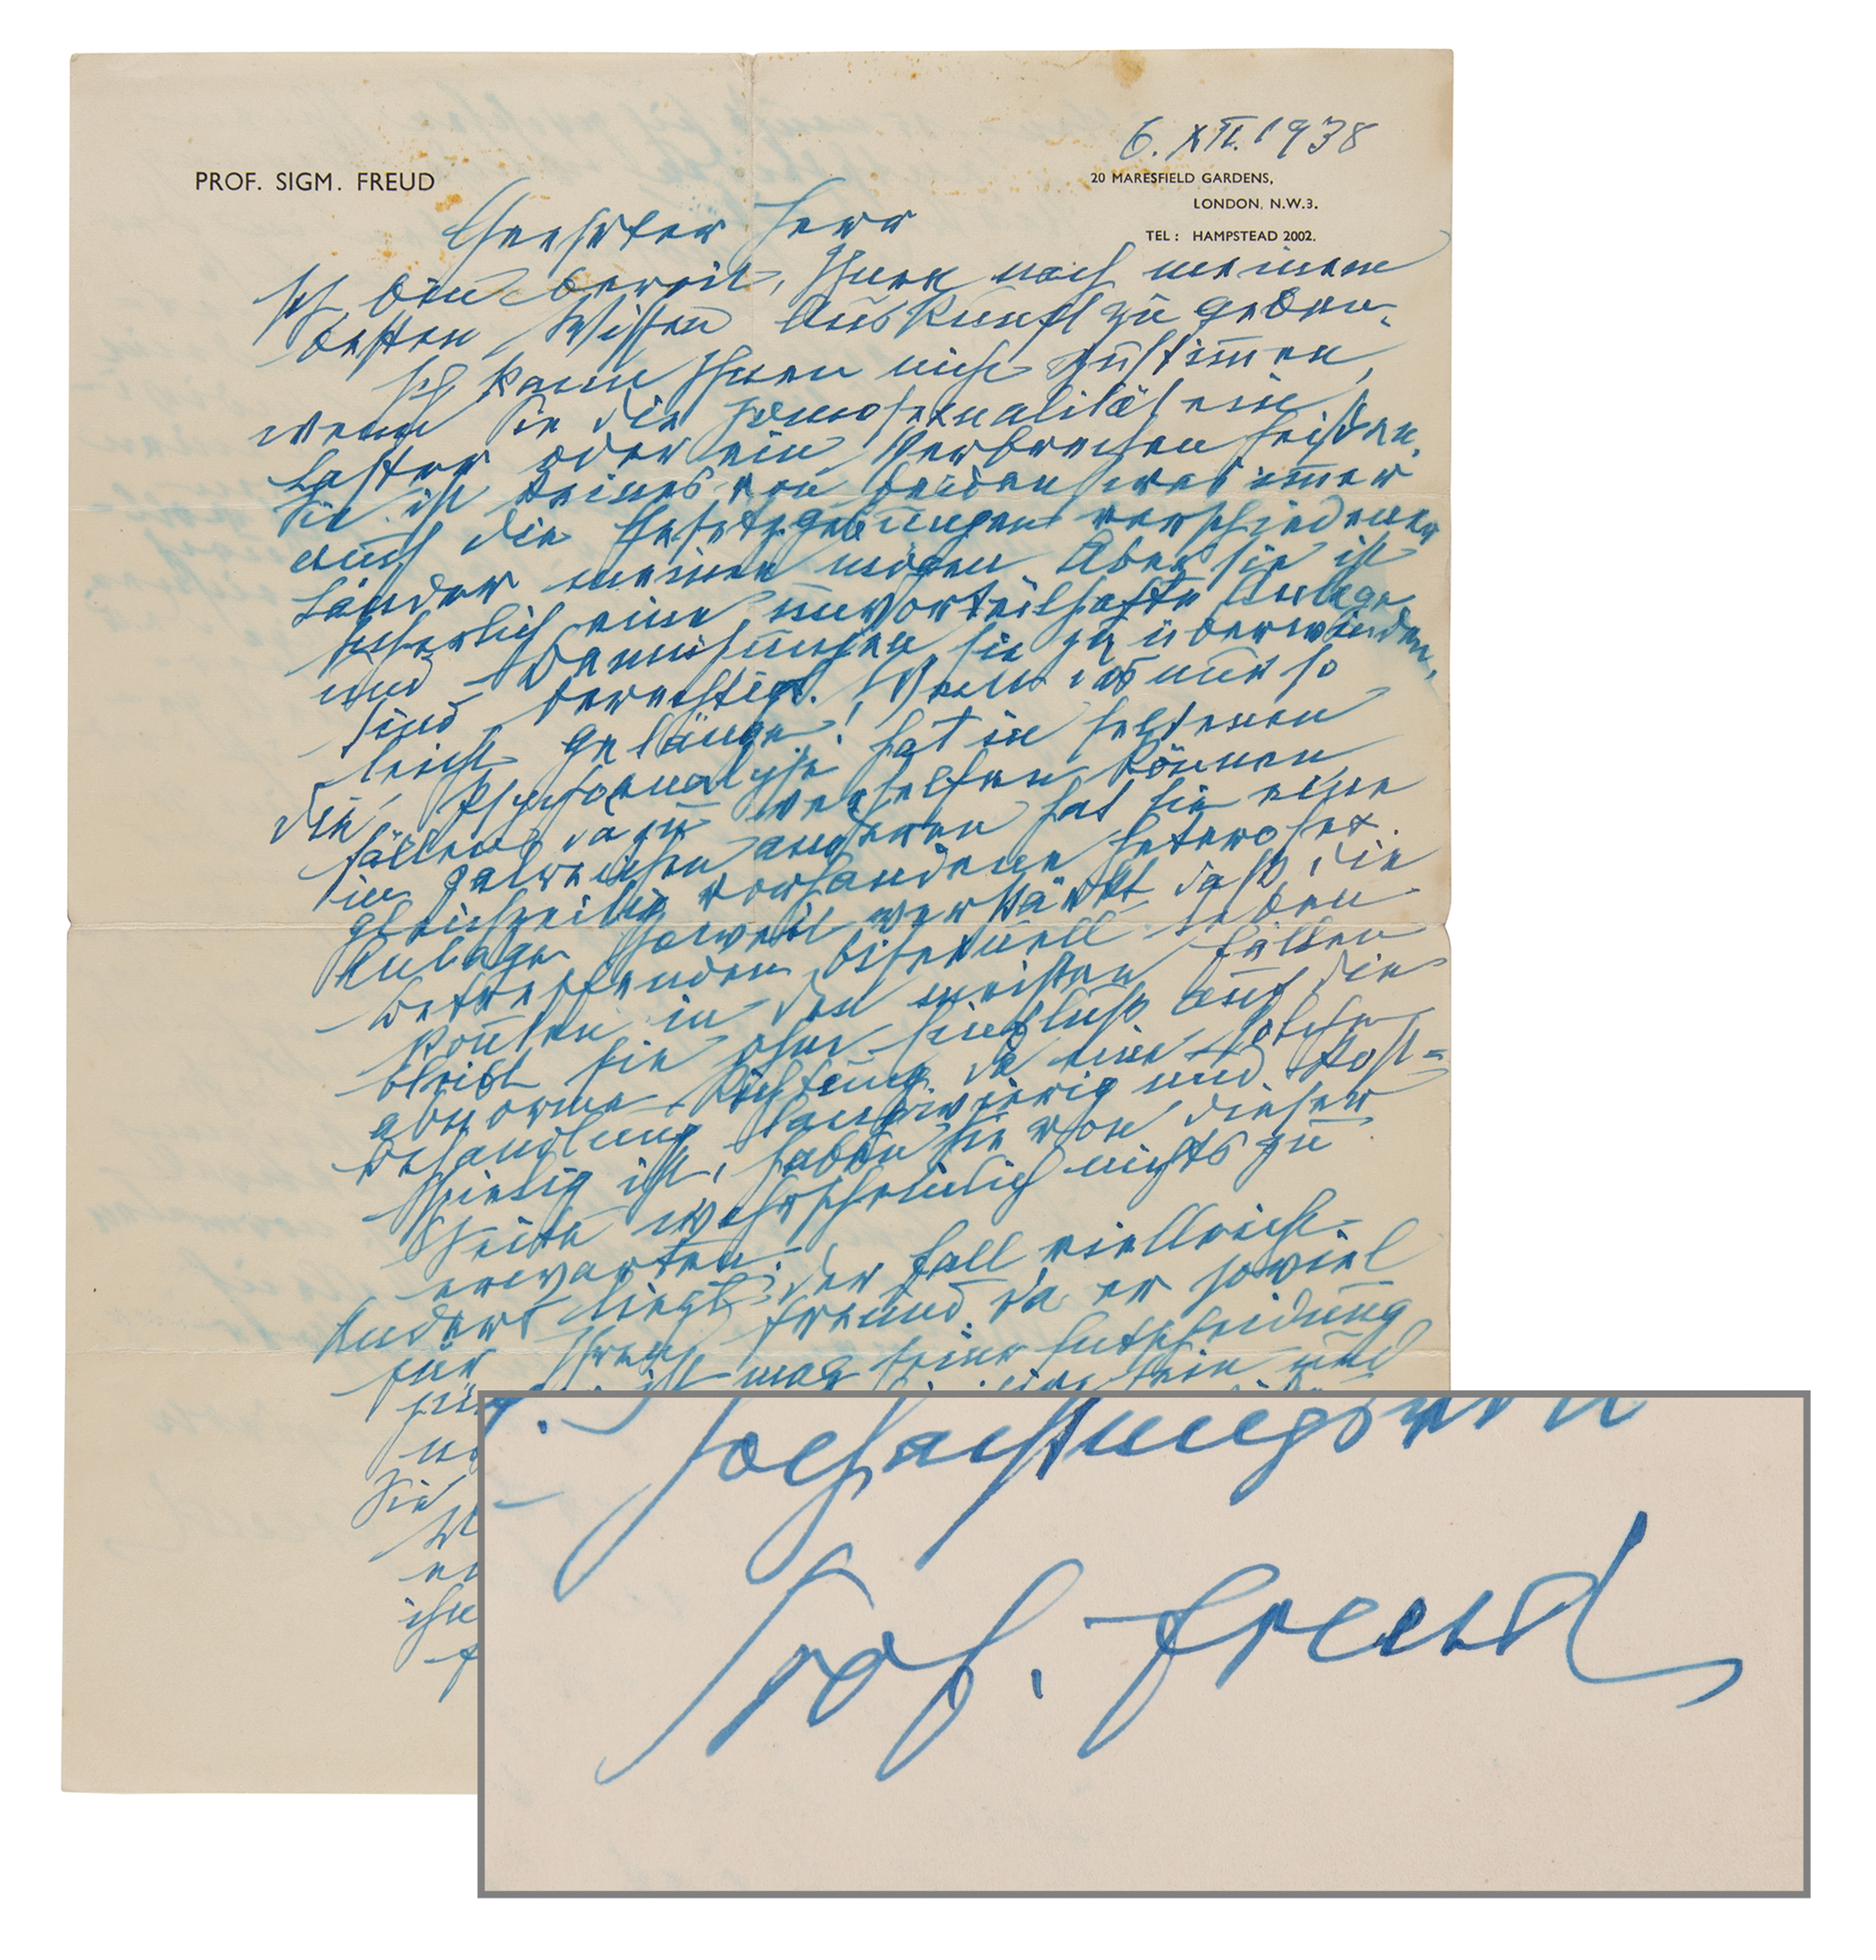 Lot #6040 Sigmund Freud Rare Autograph Letter Signed on Homosexuality, ...several of the greatest men in history were homosexuals